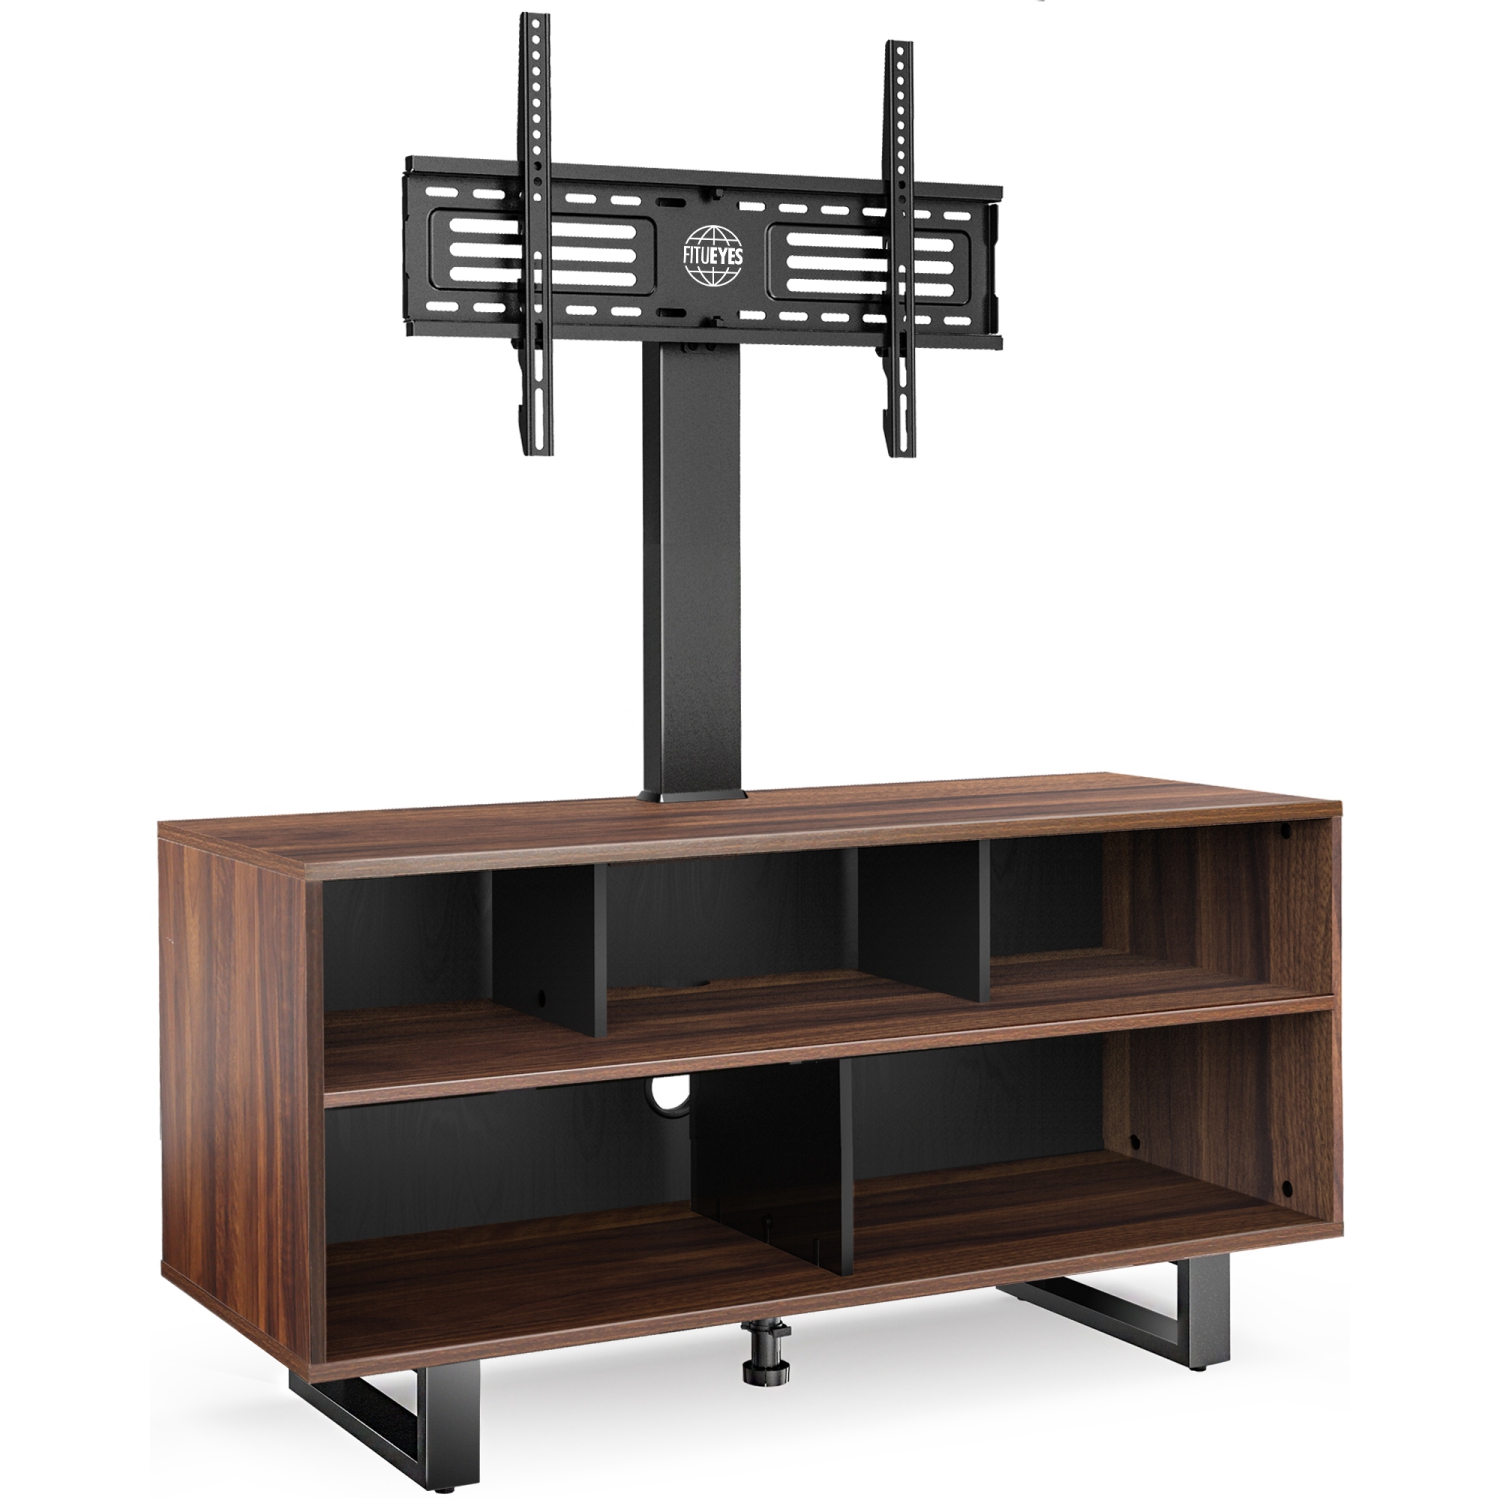 FITUEYES Swivel Floor TV Stand for 32 - 65 Inch TVS Universal Corner TV Stands with Storage for Media Console Holds Up to 99 Pounds 2 Levels Height Adjustment Television Stands VESA 400x600mm